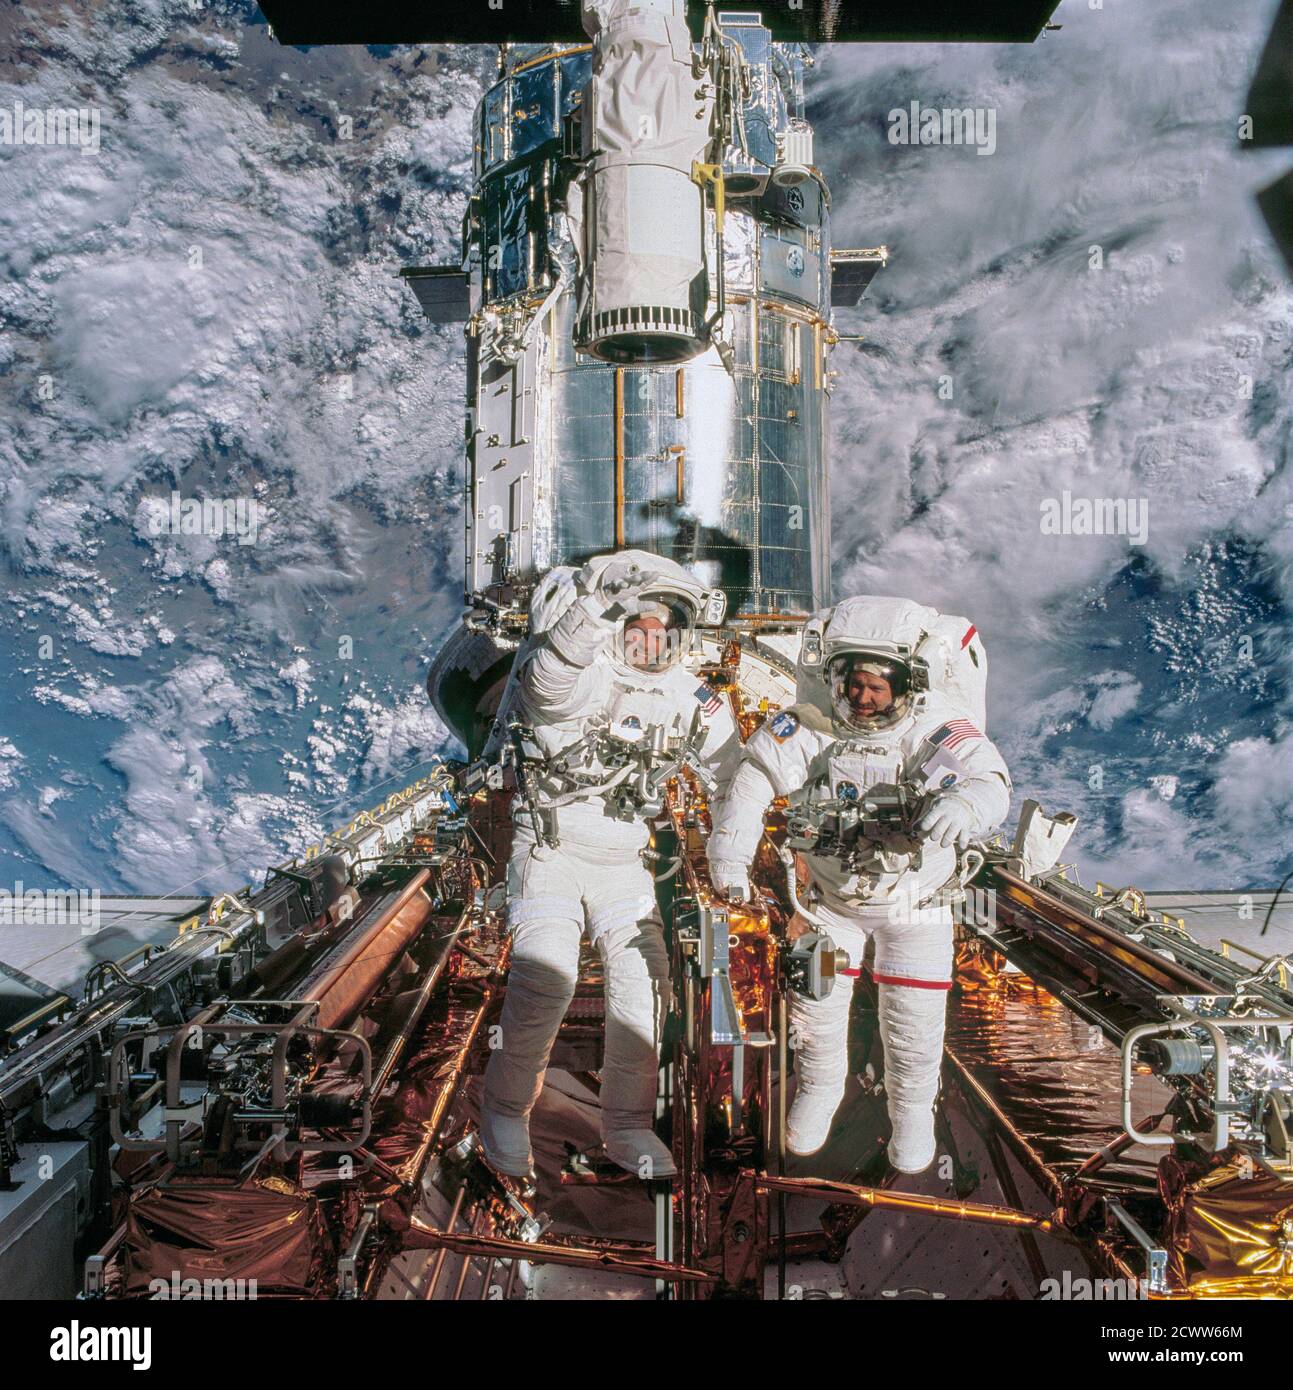 Hubble Servicing Mission 3B-05 In celebration of the 25th anniversary of NASA's first space servicing mission to the Hubble Space Telescope, we are sharing this gallery of images from all five of